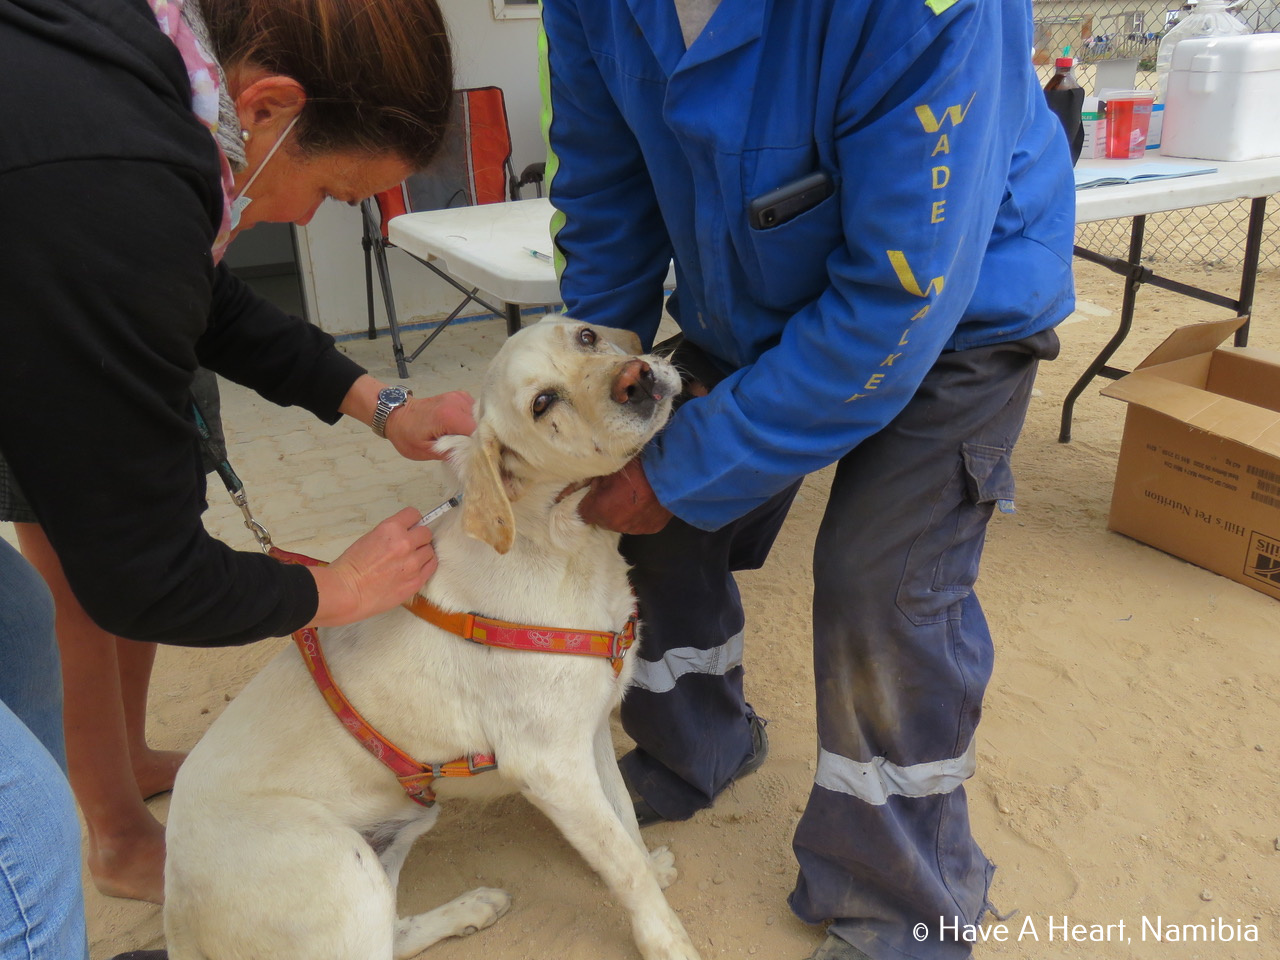 Community dog gets a rabies vaccination to keep it safe, Namibia. Have a Heart. 